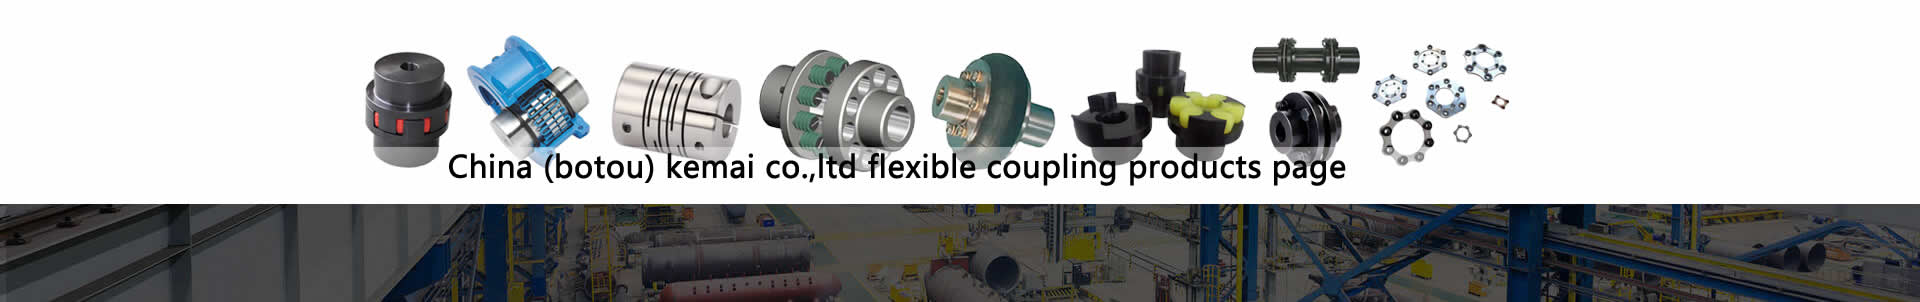 Flexible Coupling Manufacturer In China